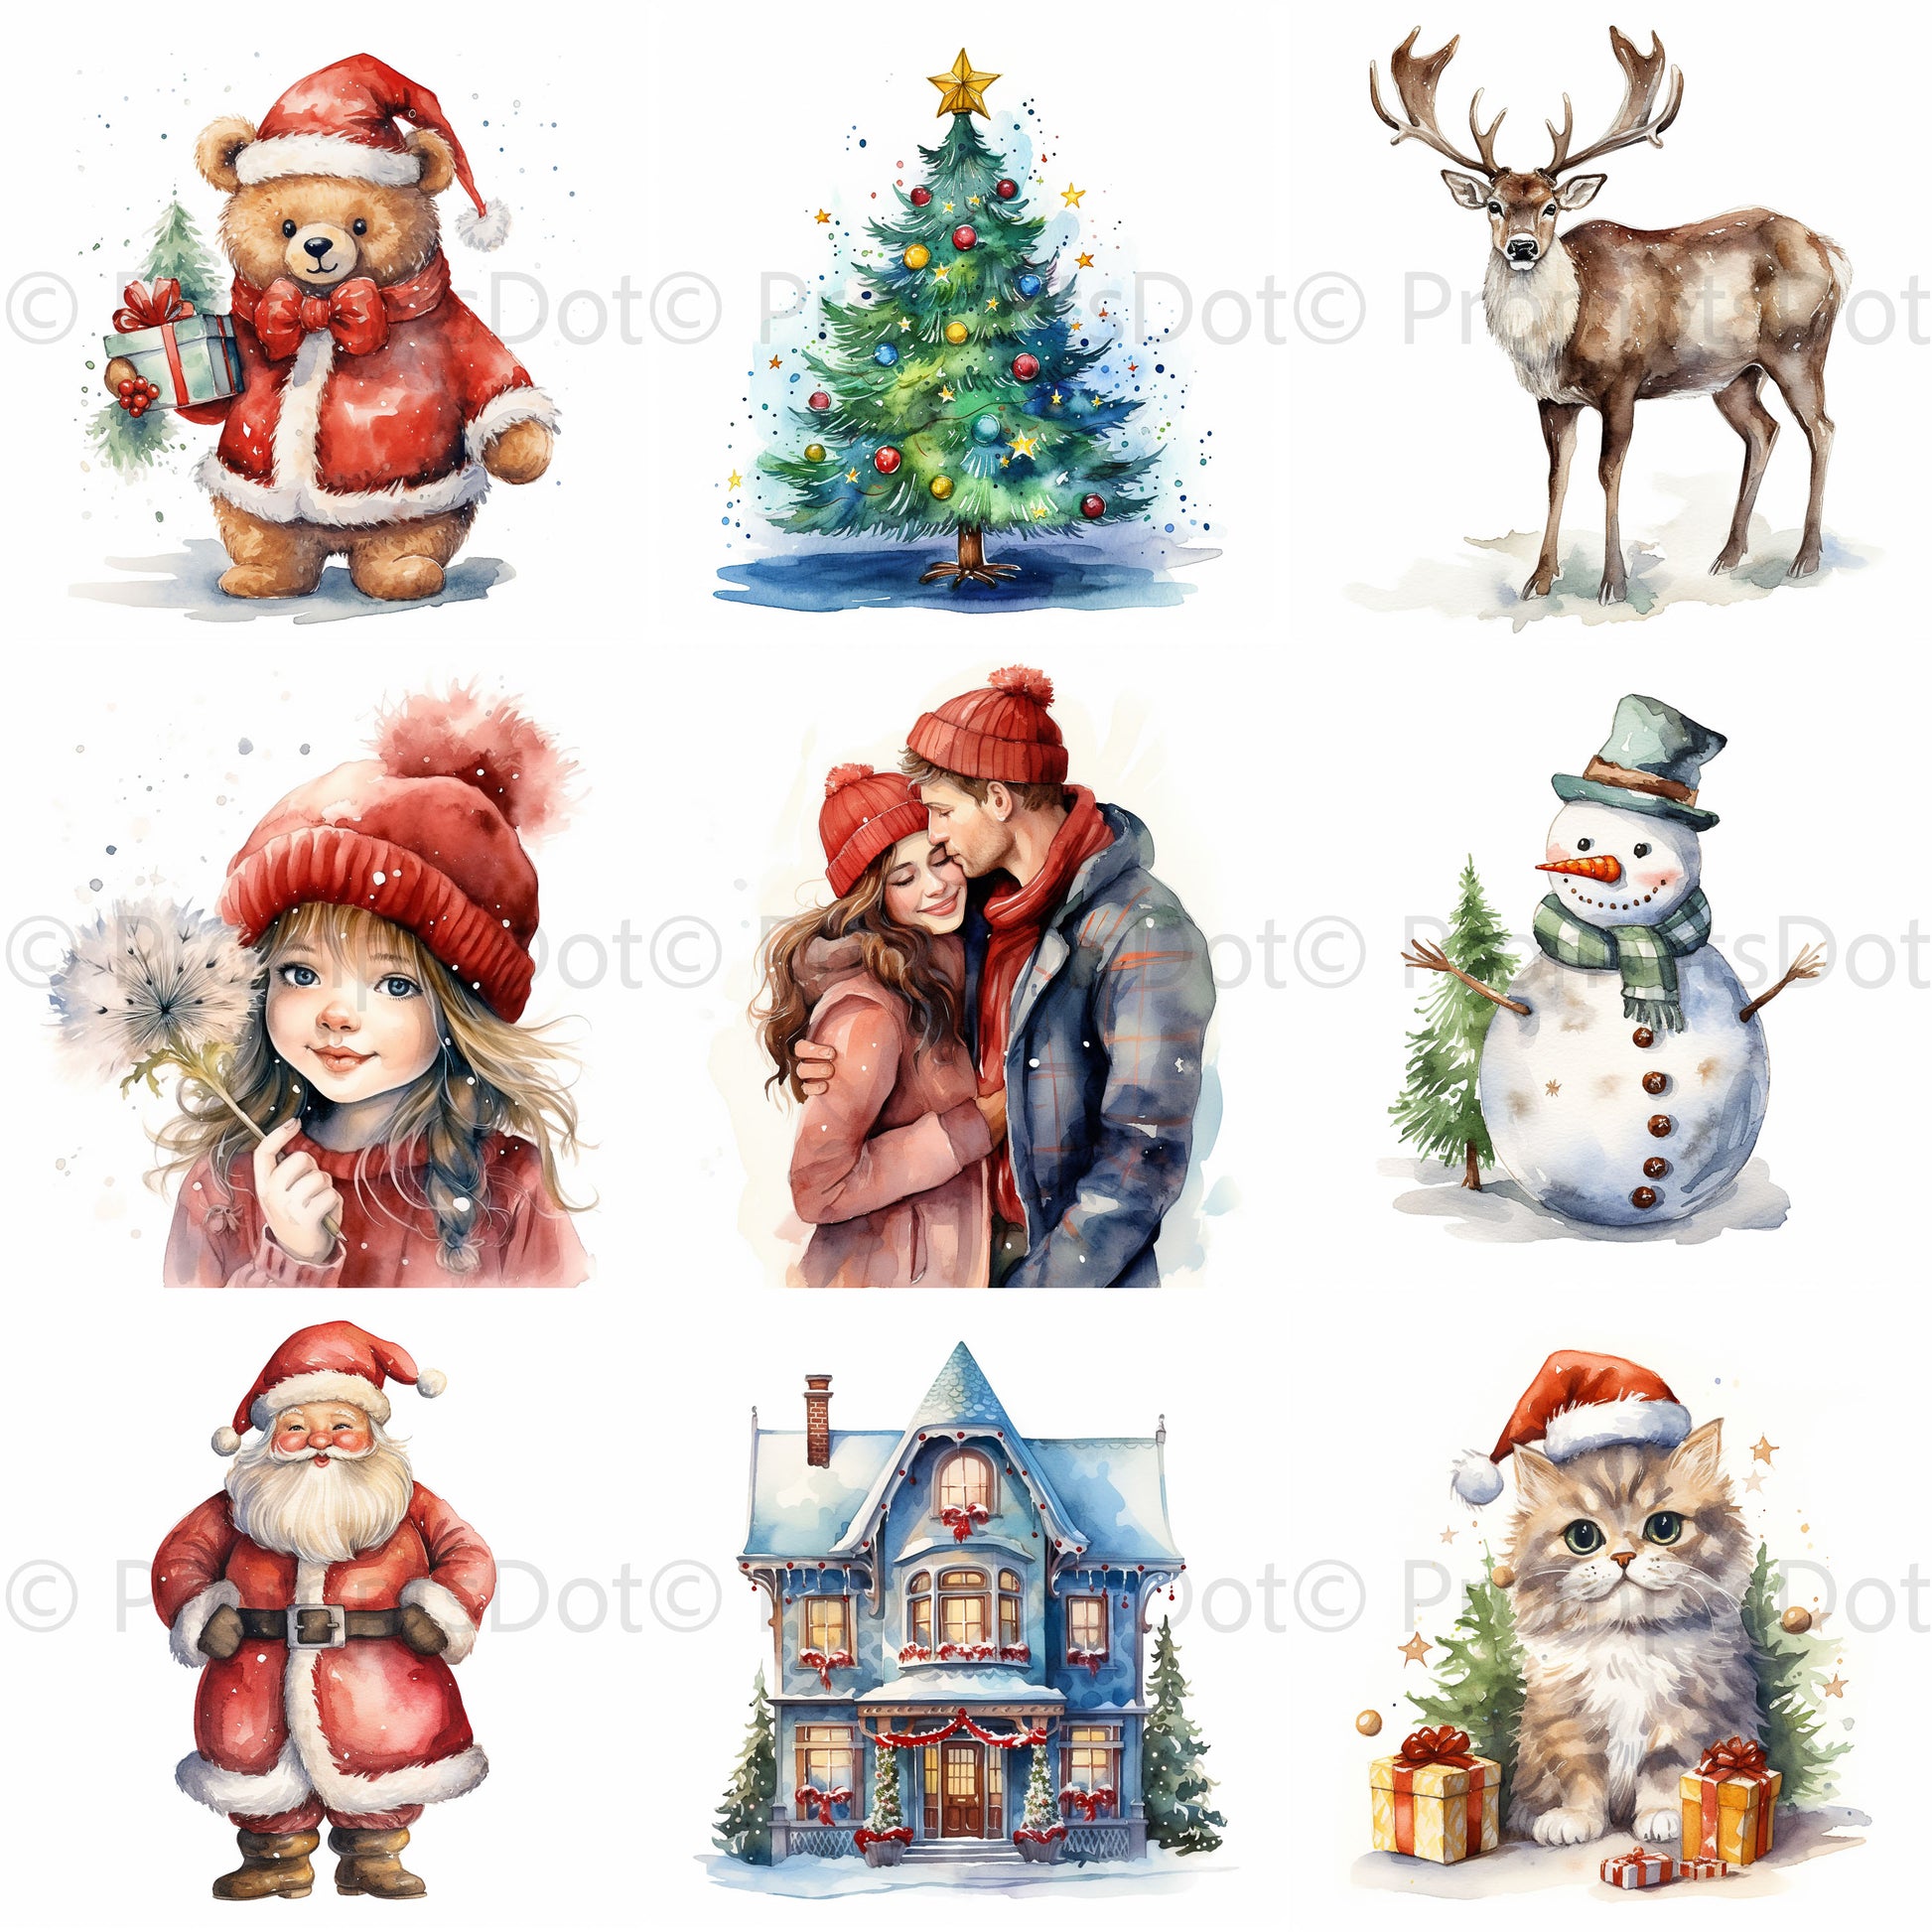 Vintage Christmas Watercolor Specials Digital Art and Midjourney Prompt Commercial Use